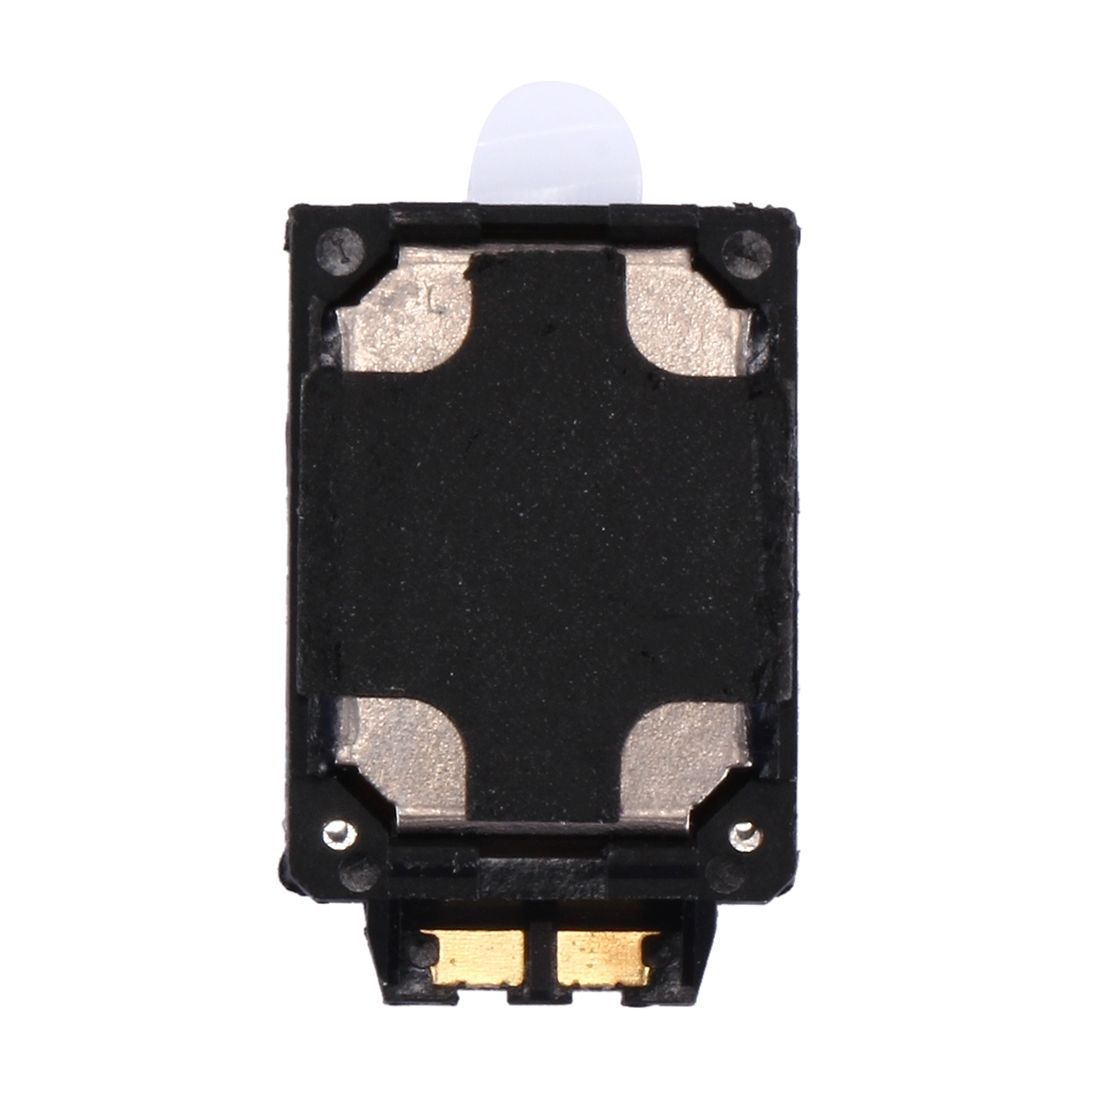 Samsung Galaxy J7 J710 / 2016 Replacement Loudspeaker Buzzer for [product_price] - First Help Tech